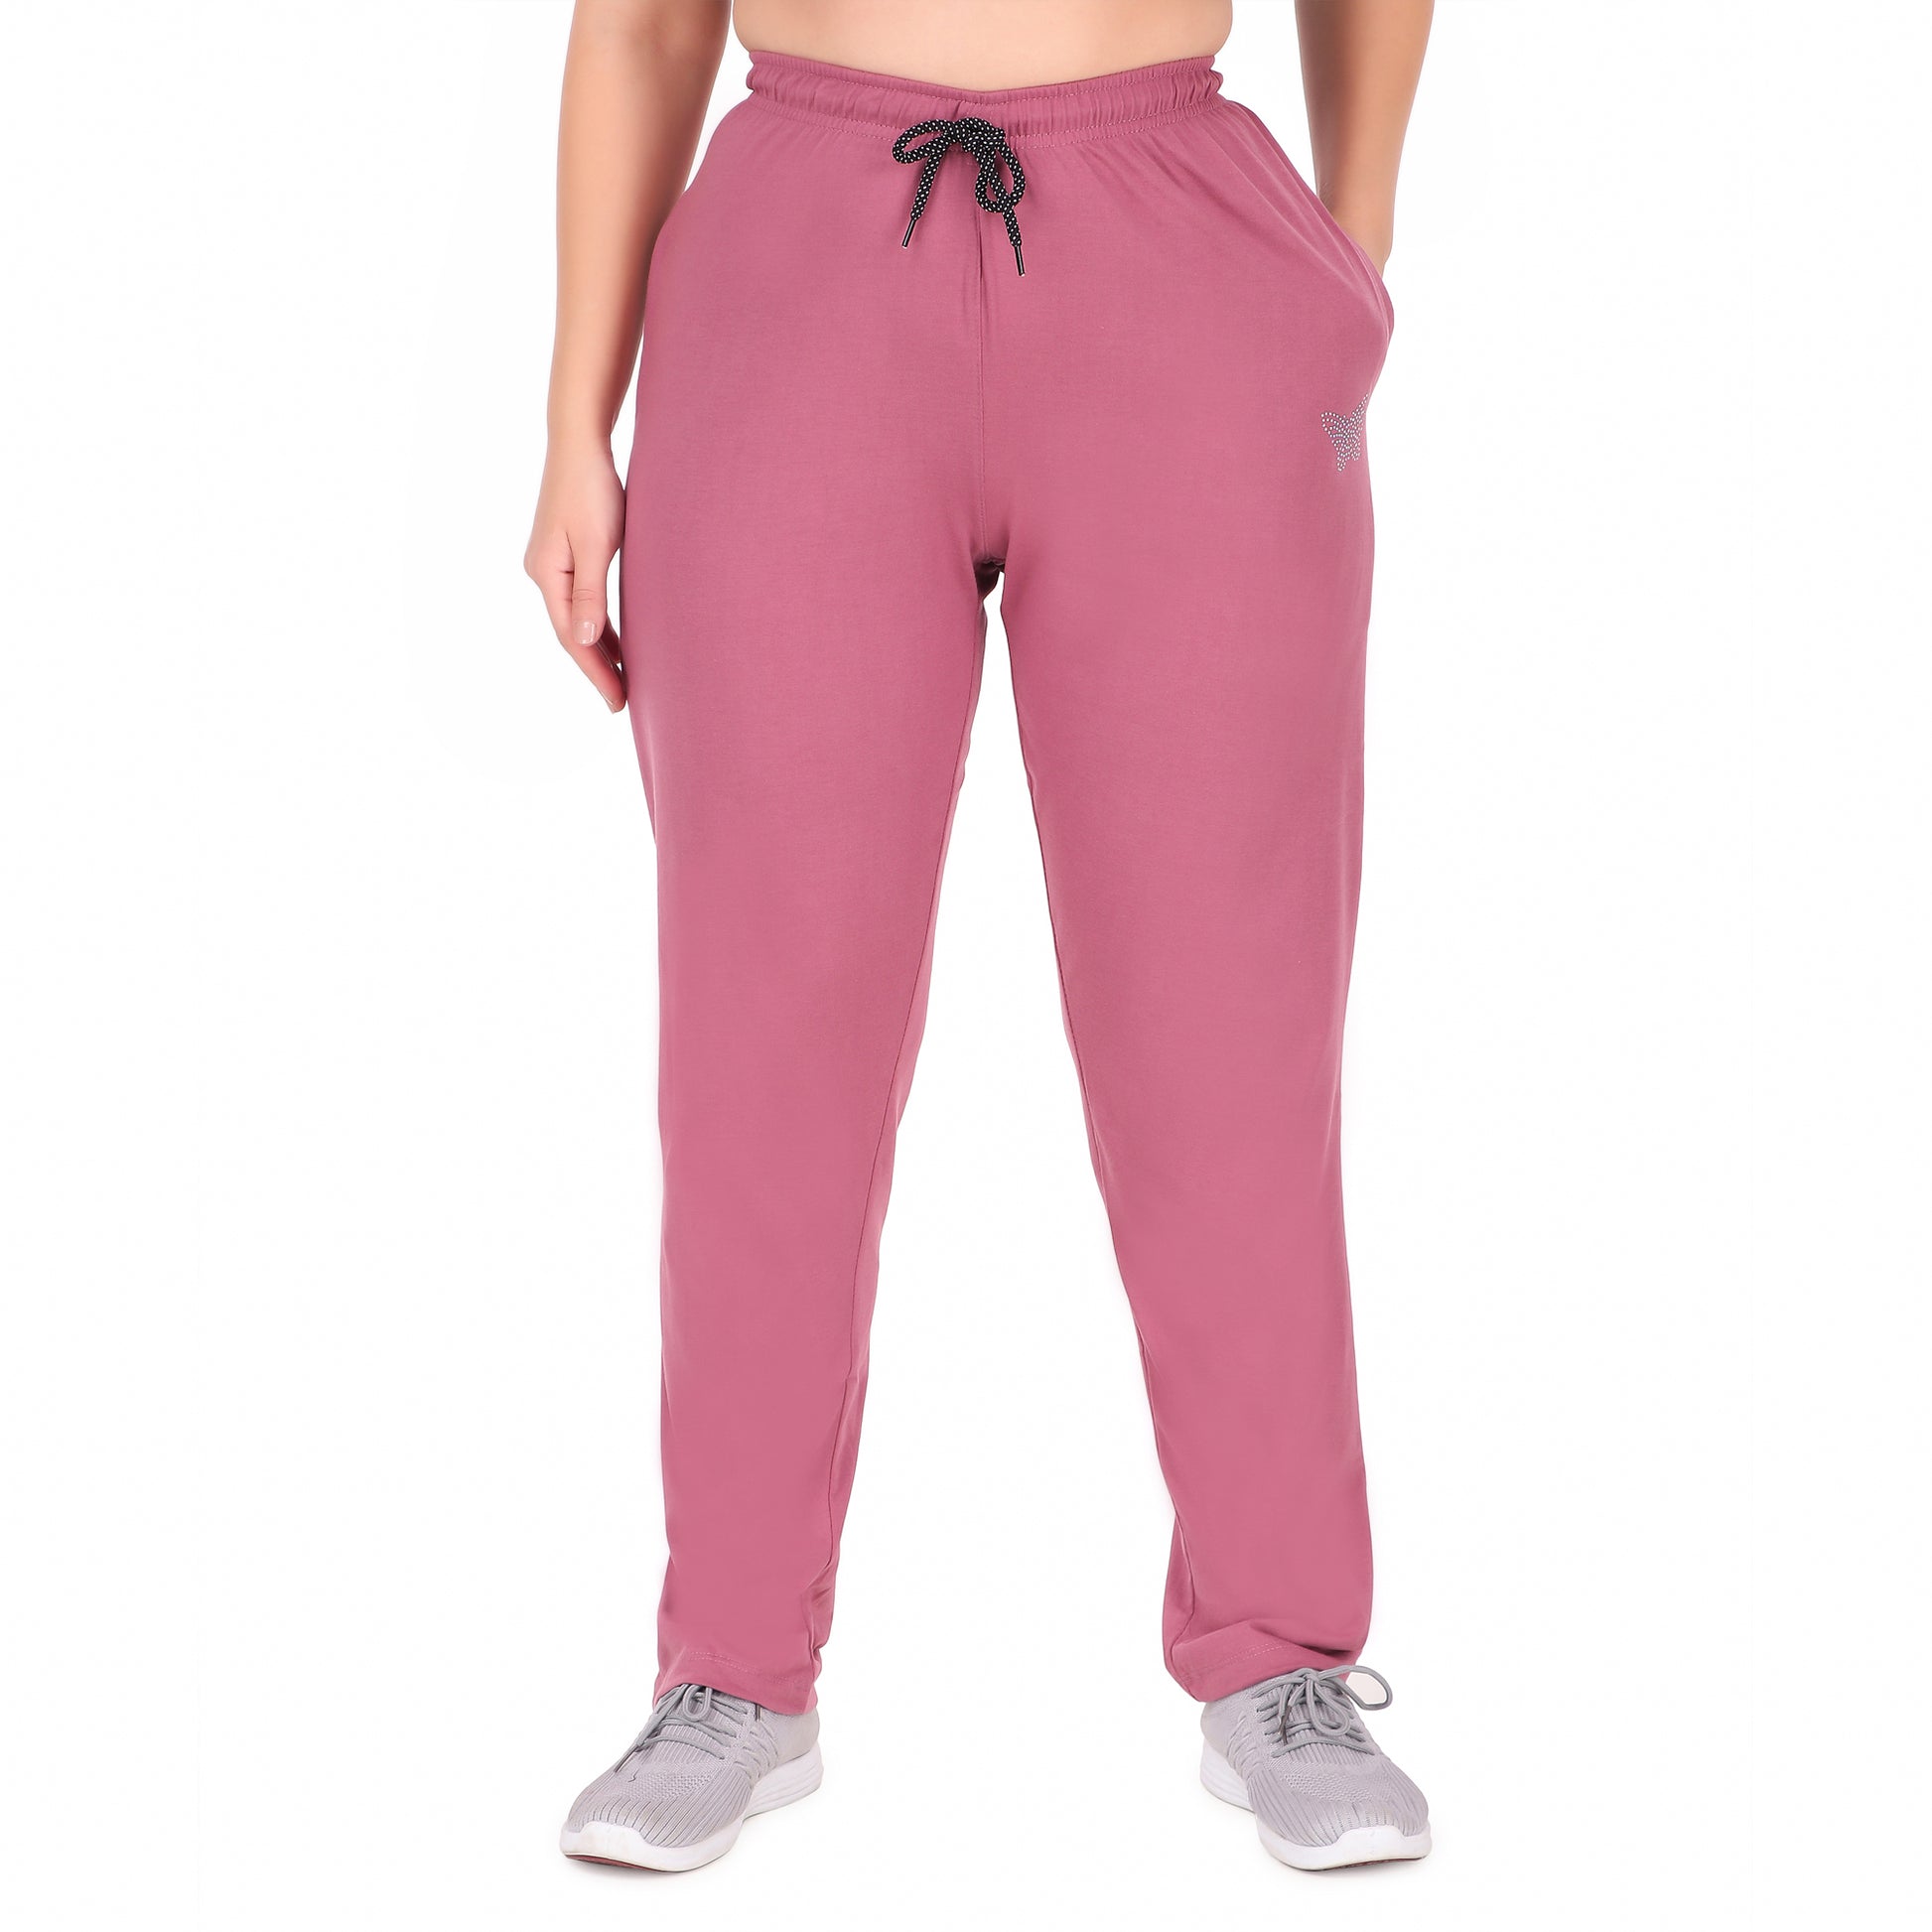 Cupid Cotton Track Pant for Women And Girls Combo Pack of 3 - Mauve/Teal/Navy freeshipping - Cupid Clothings